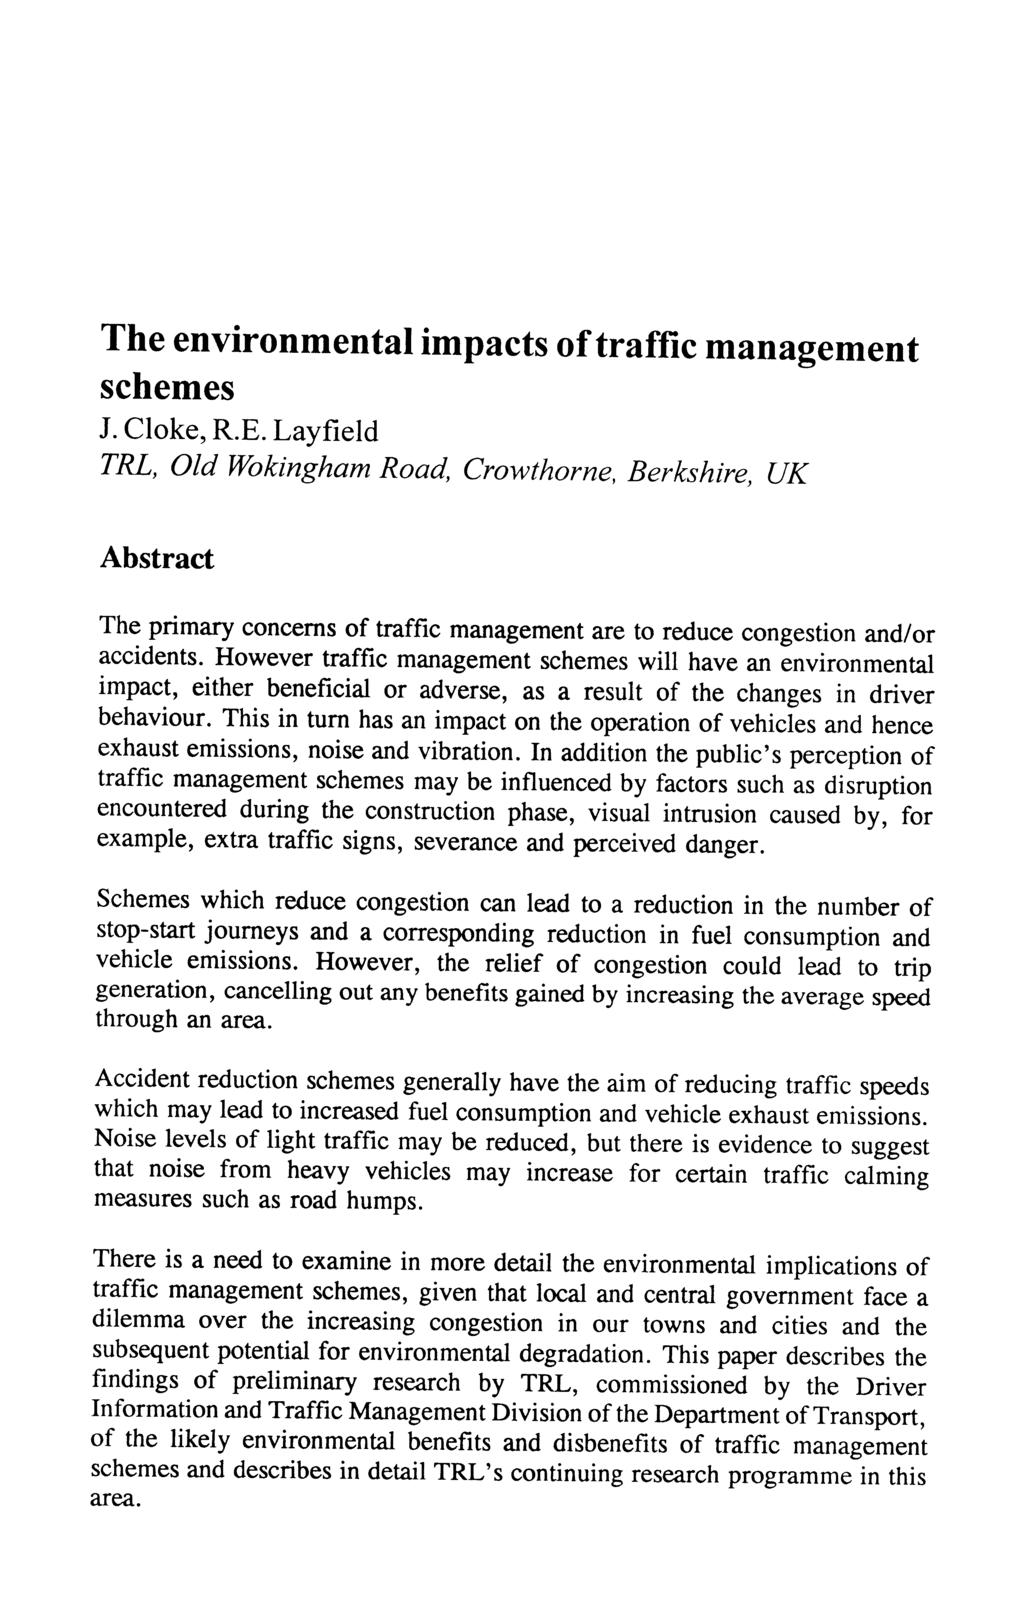 The environmental impacts of traffic management schemes J.Cloke,R.E.Layfield Abstract The primary concerns of traffic management are to reduce congestion and/or accidents.